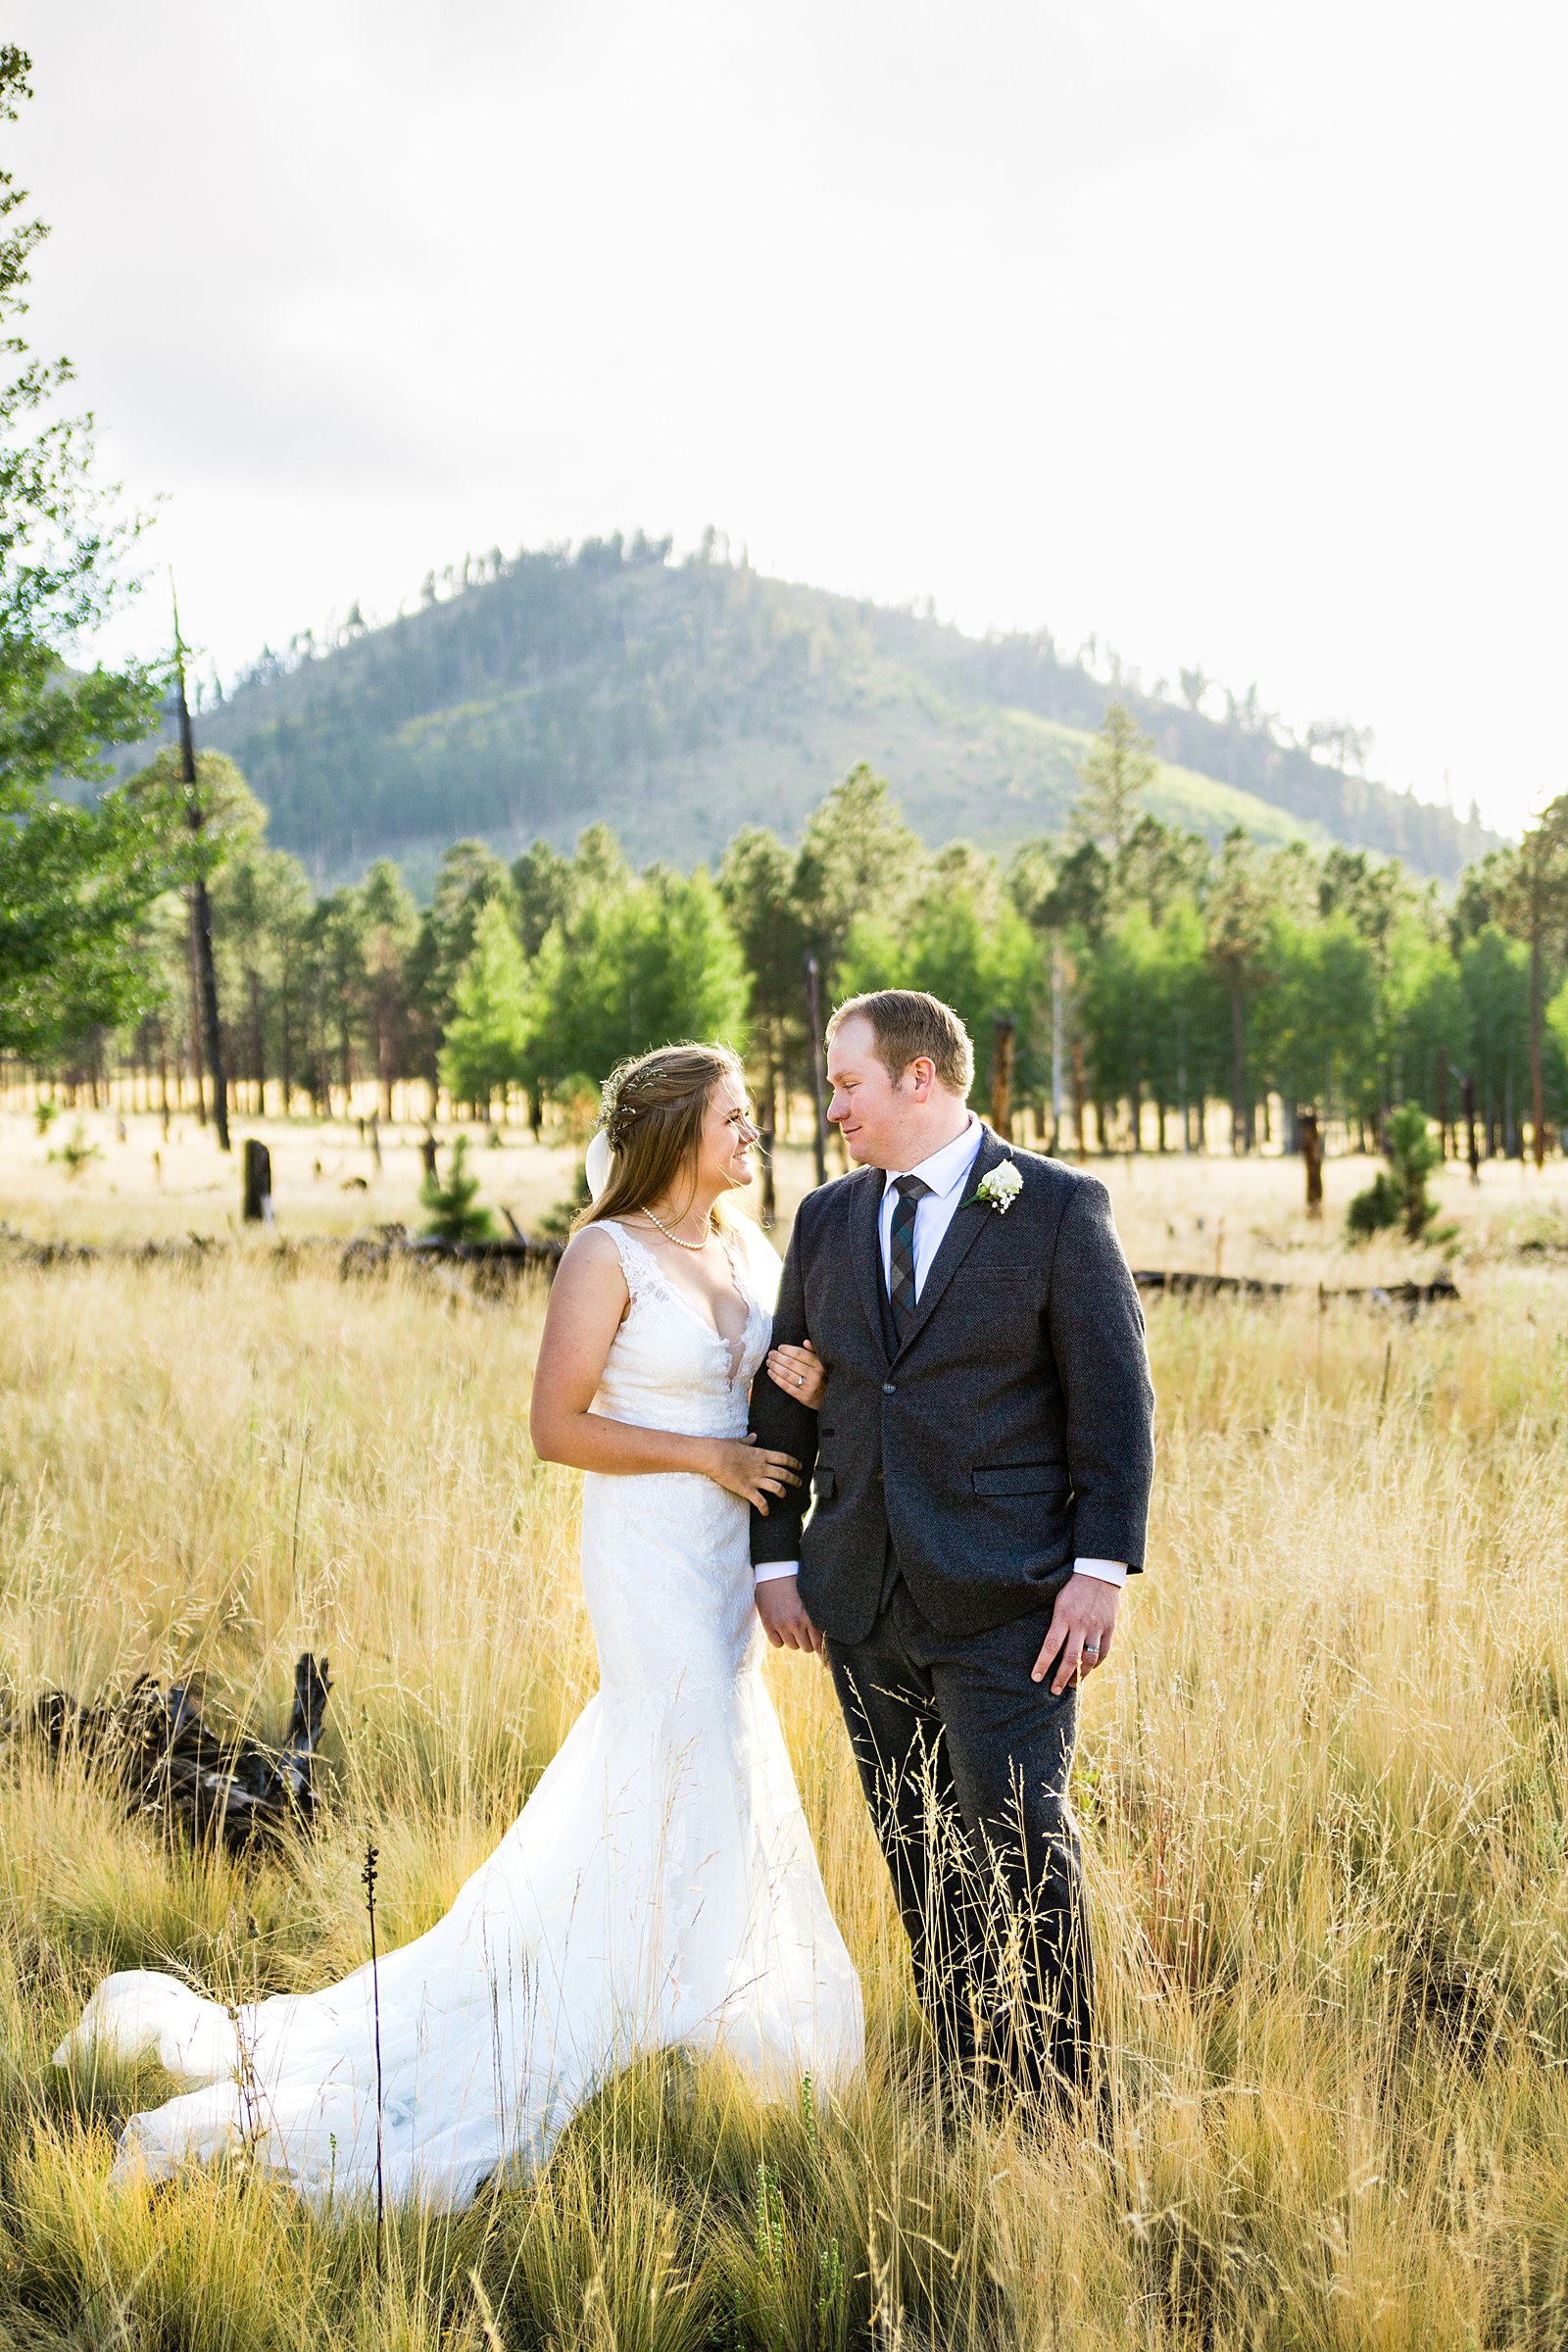 Bride and Groom pose during their The Colton House wedding by Arizona wedding photographer PMA Photography.